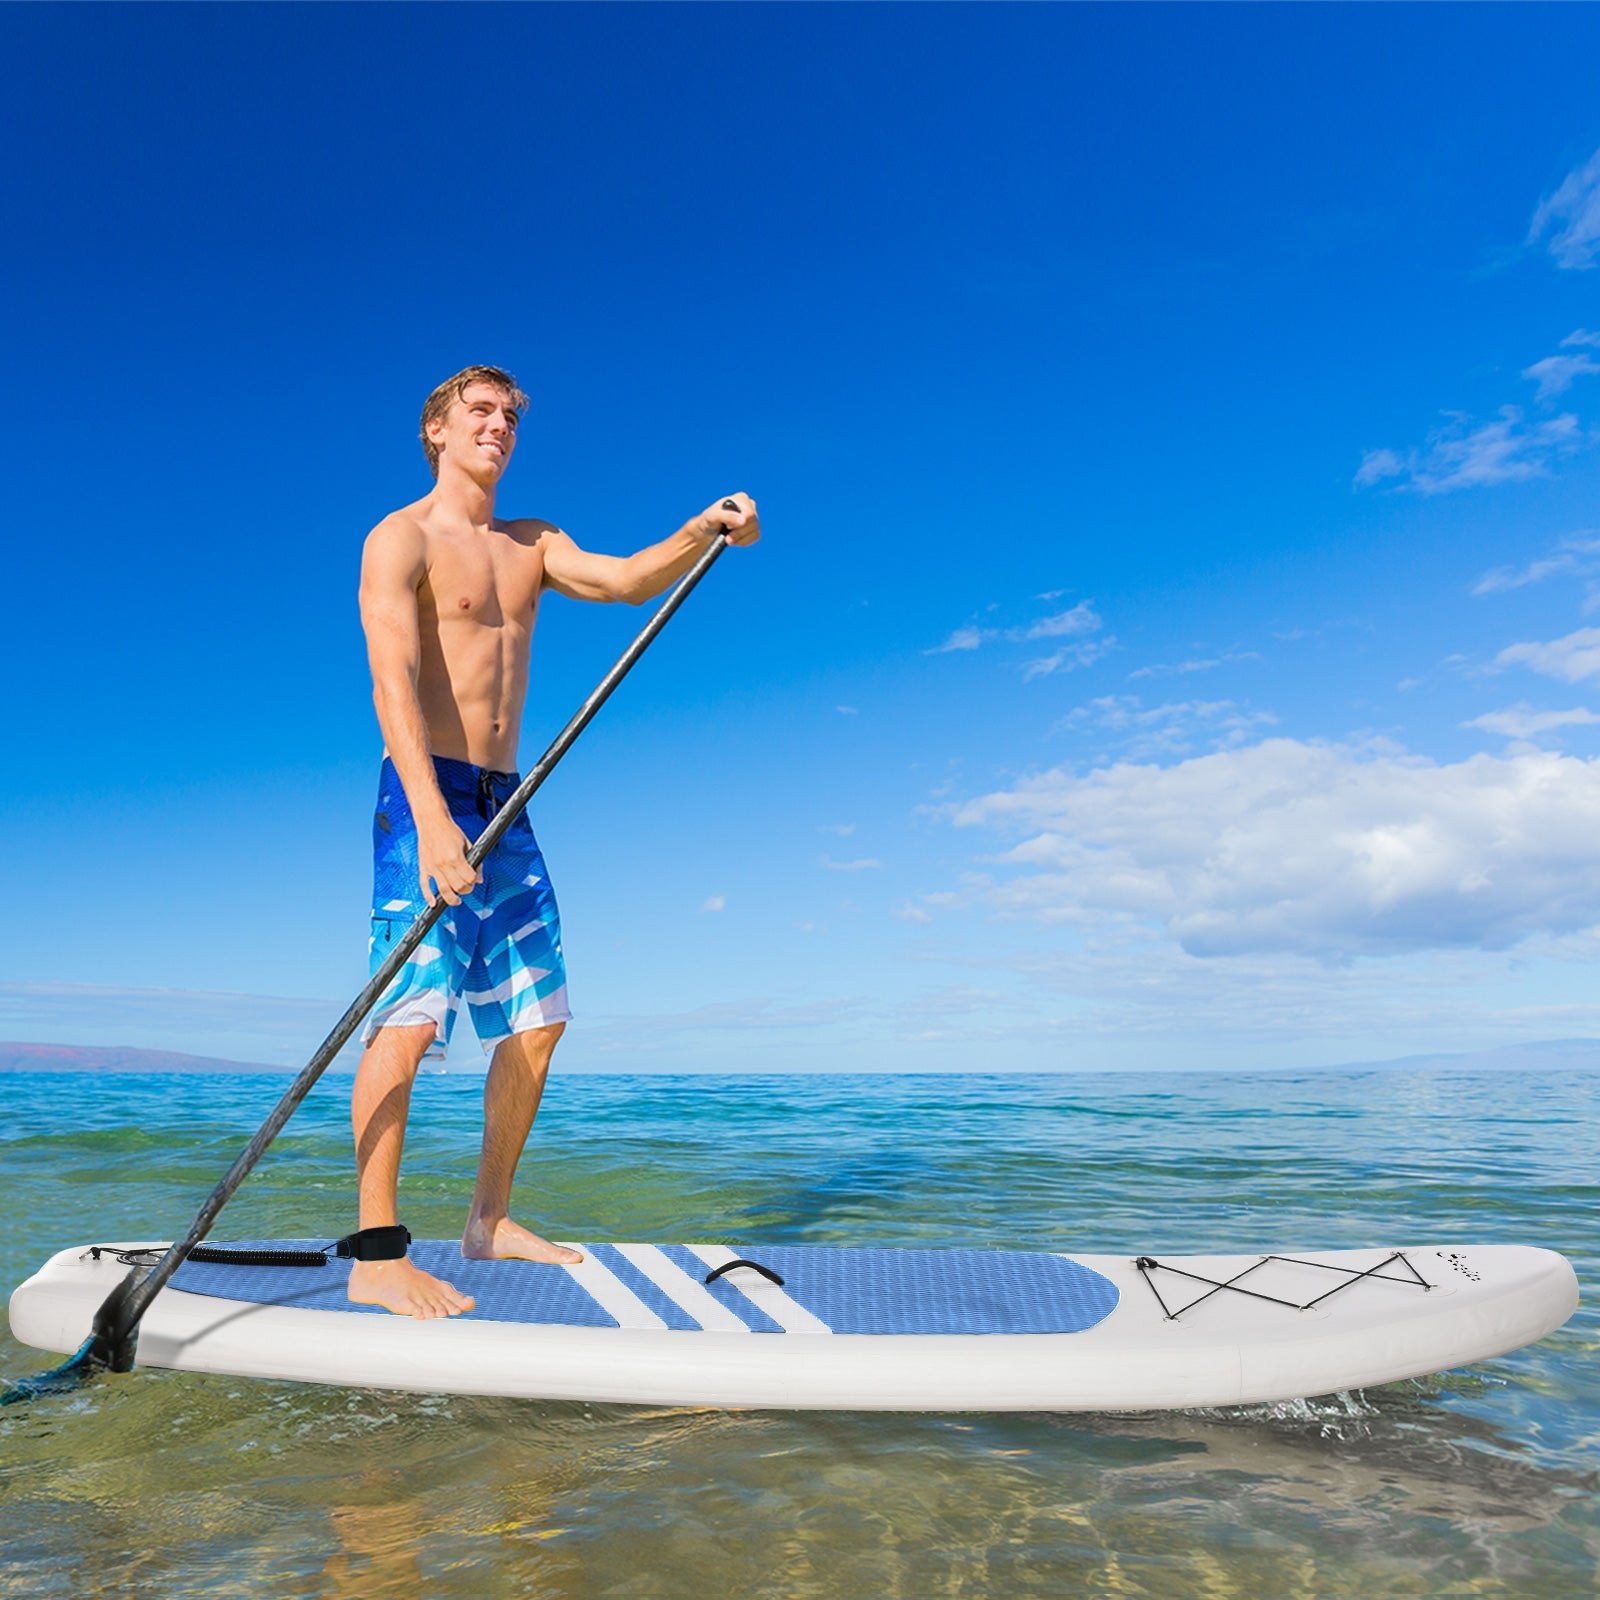 10' x 32" x 6" Inflatable Stand Up Paddle Board with ISUP Accessories, Carry Bag, Non-Slip Deck, Adj Paddle, Pump, Leash for Adults Kids, Blue and White at Gallery Canada